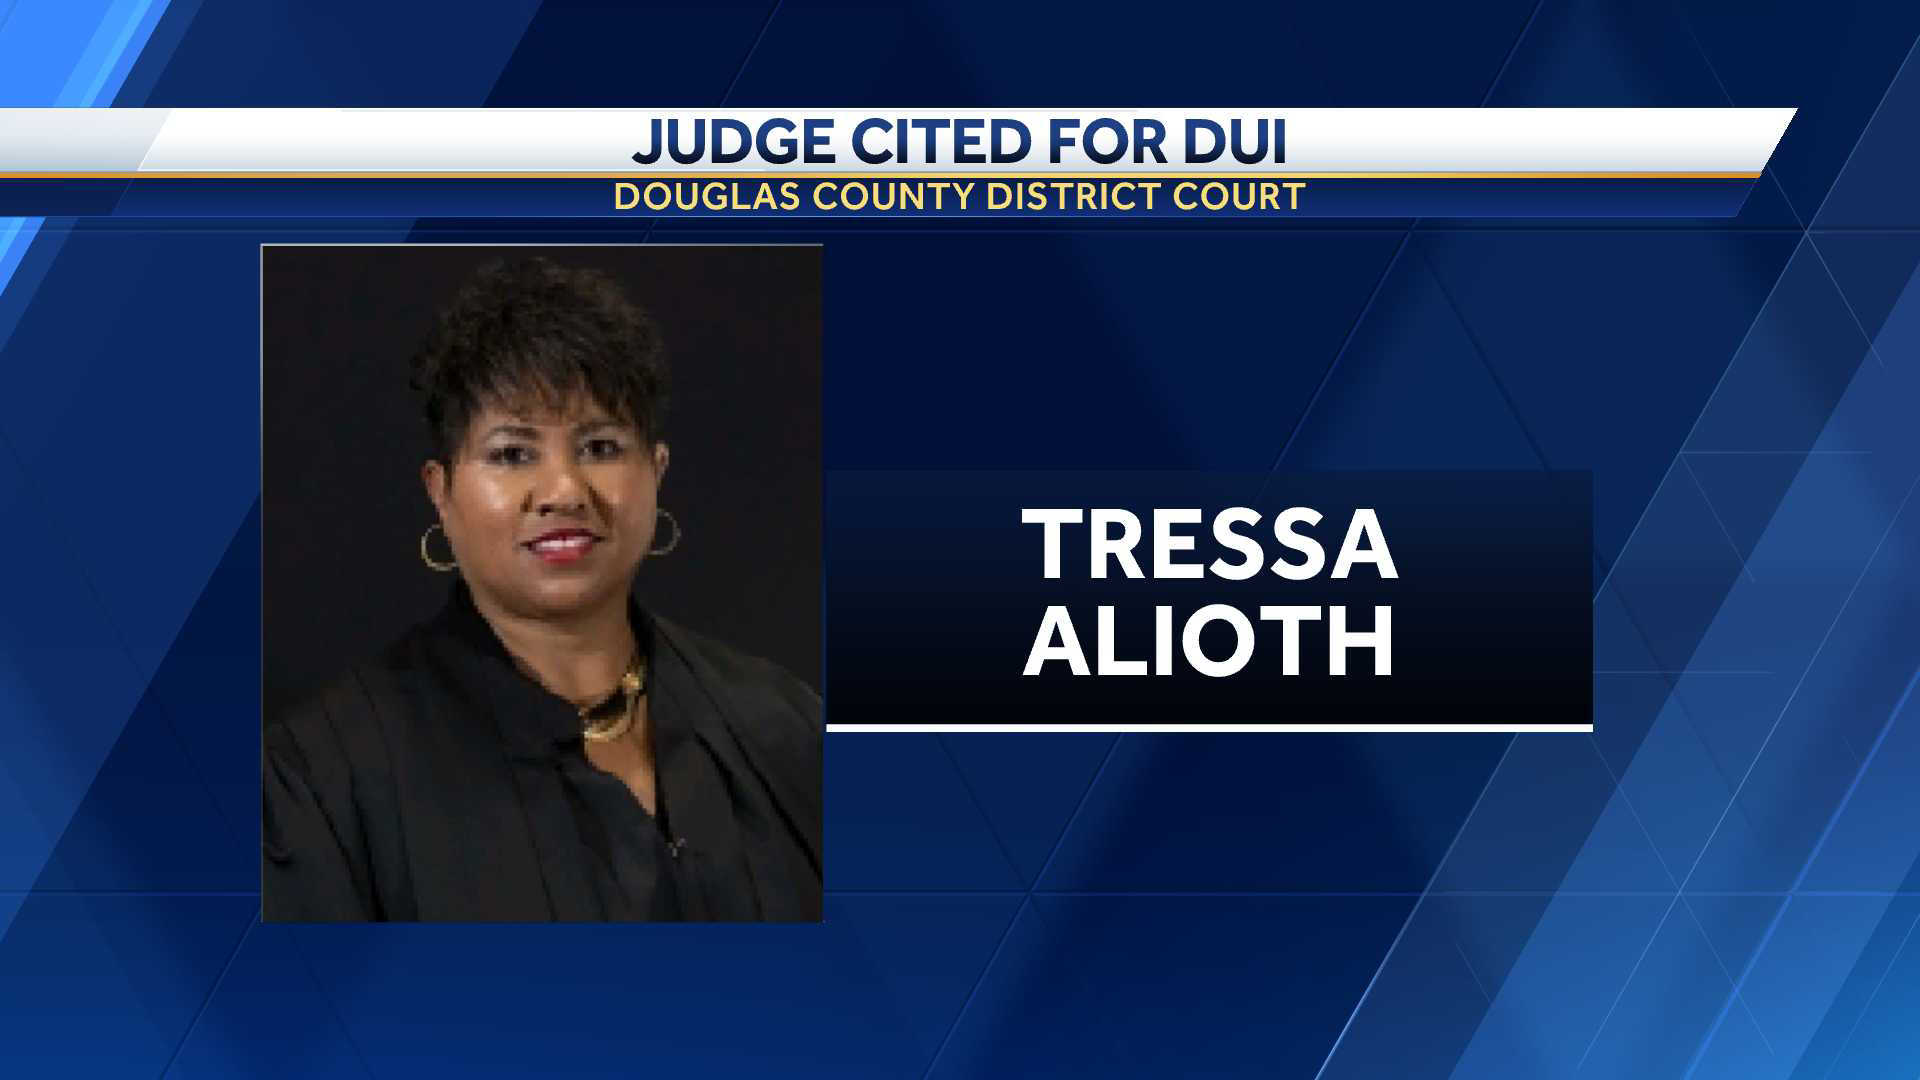 Douglas County District Judge cited for DUI